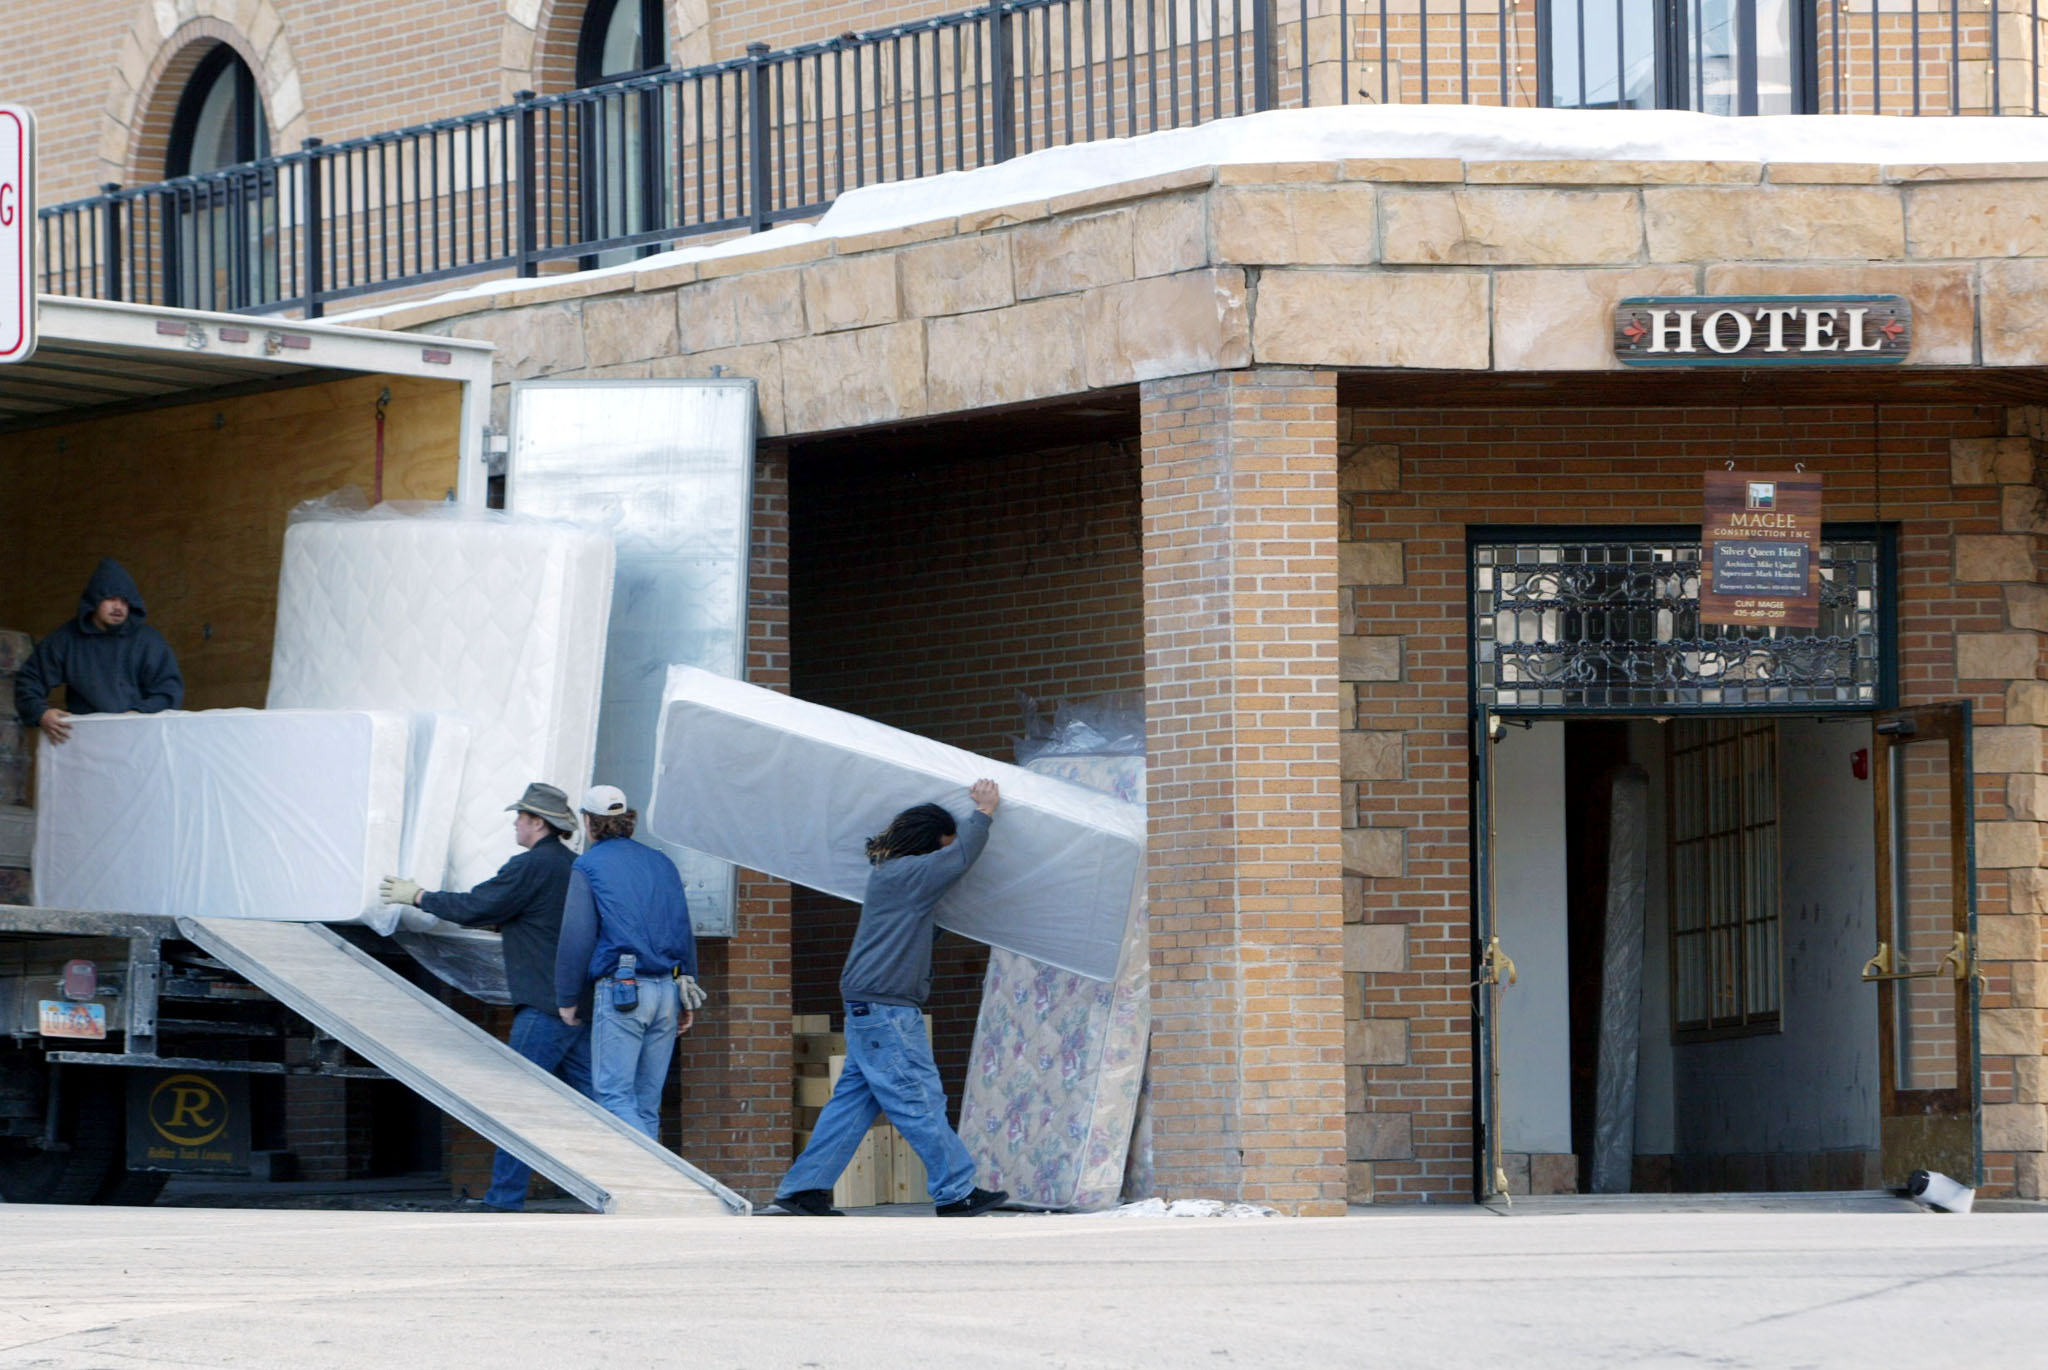 Workers carry mattresses into a hotel in downtown Park City